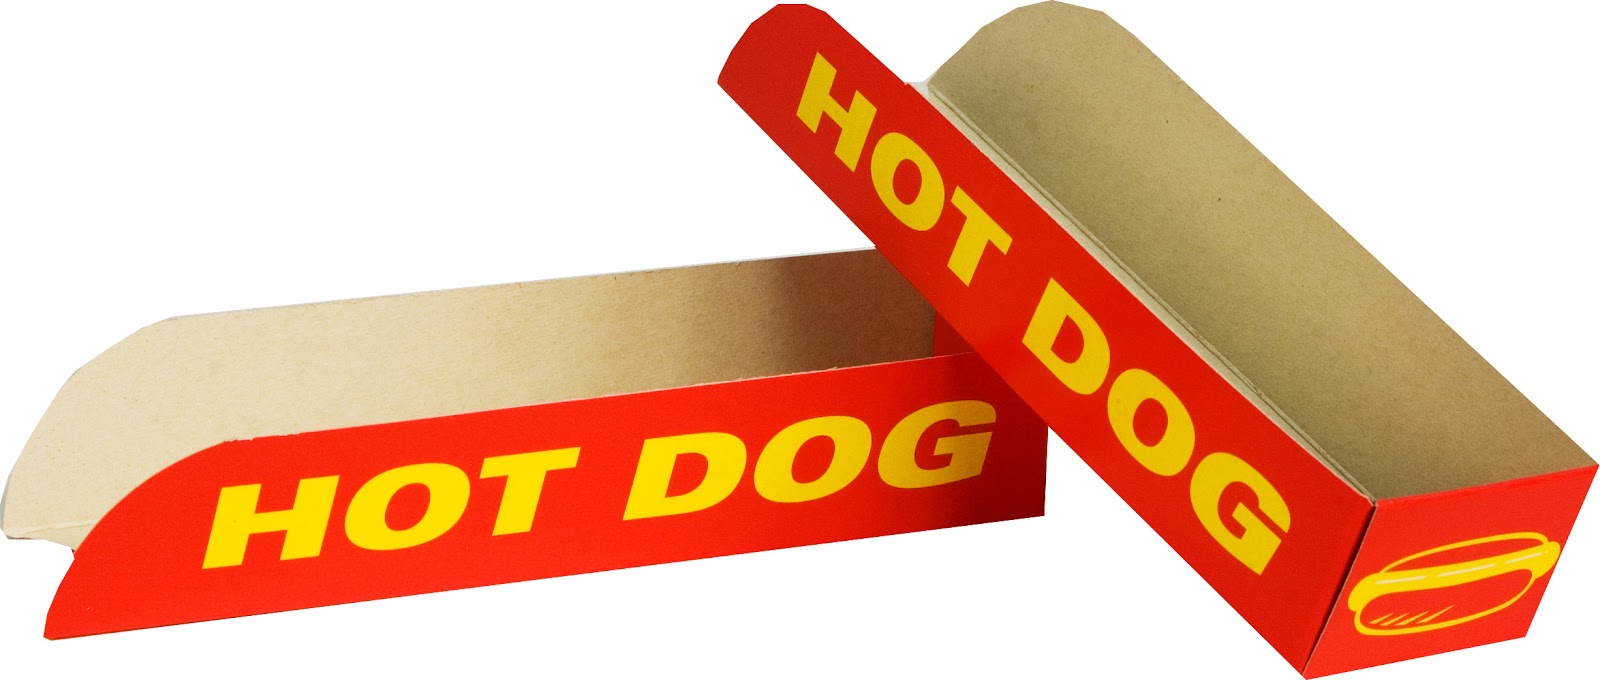 custom hot dog boxes wholesale in usa